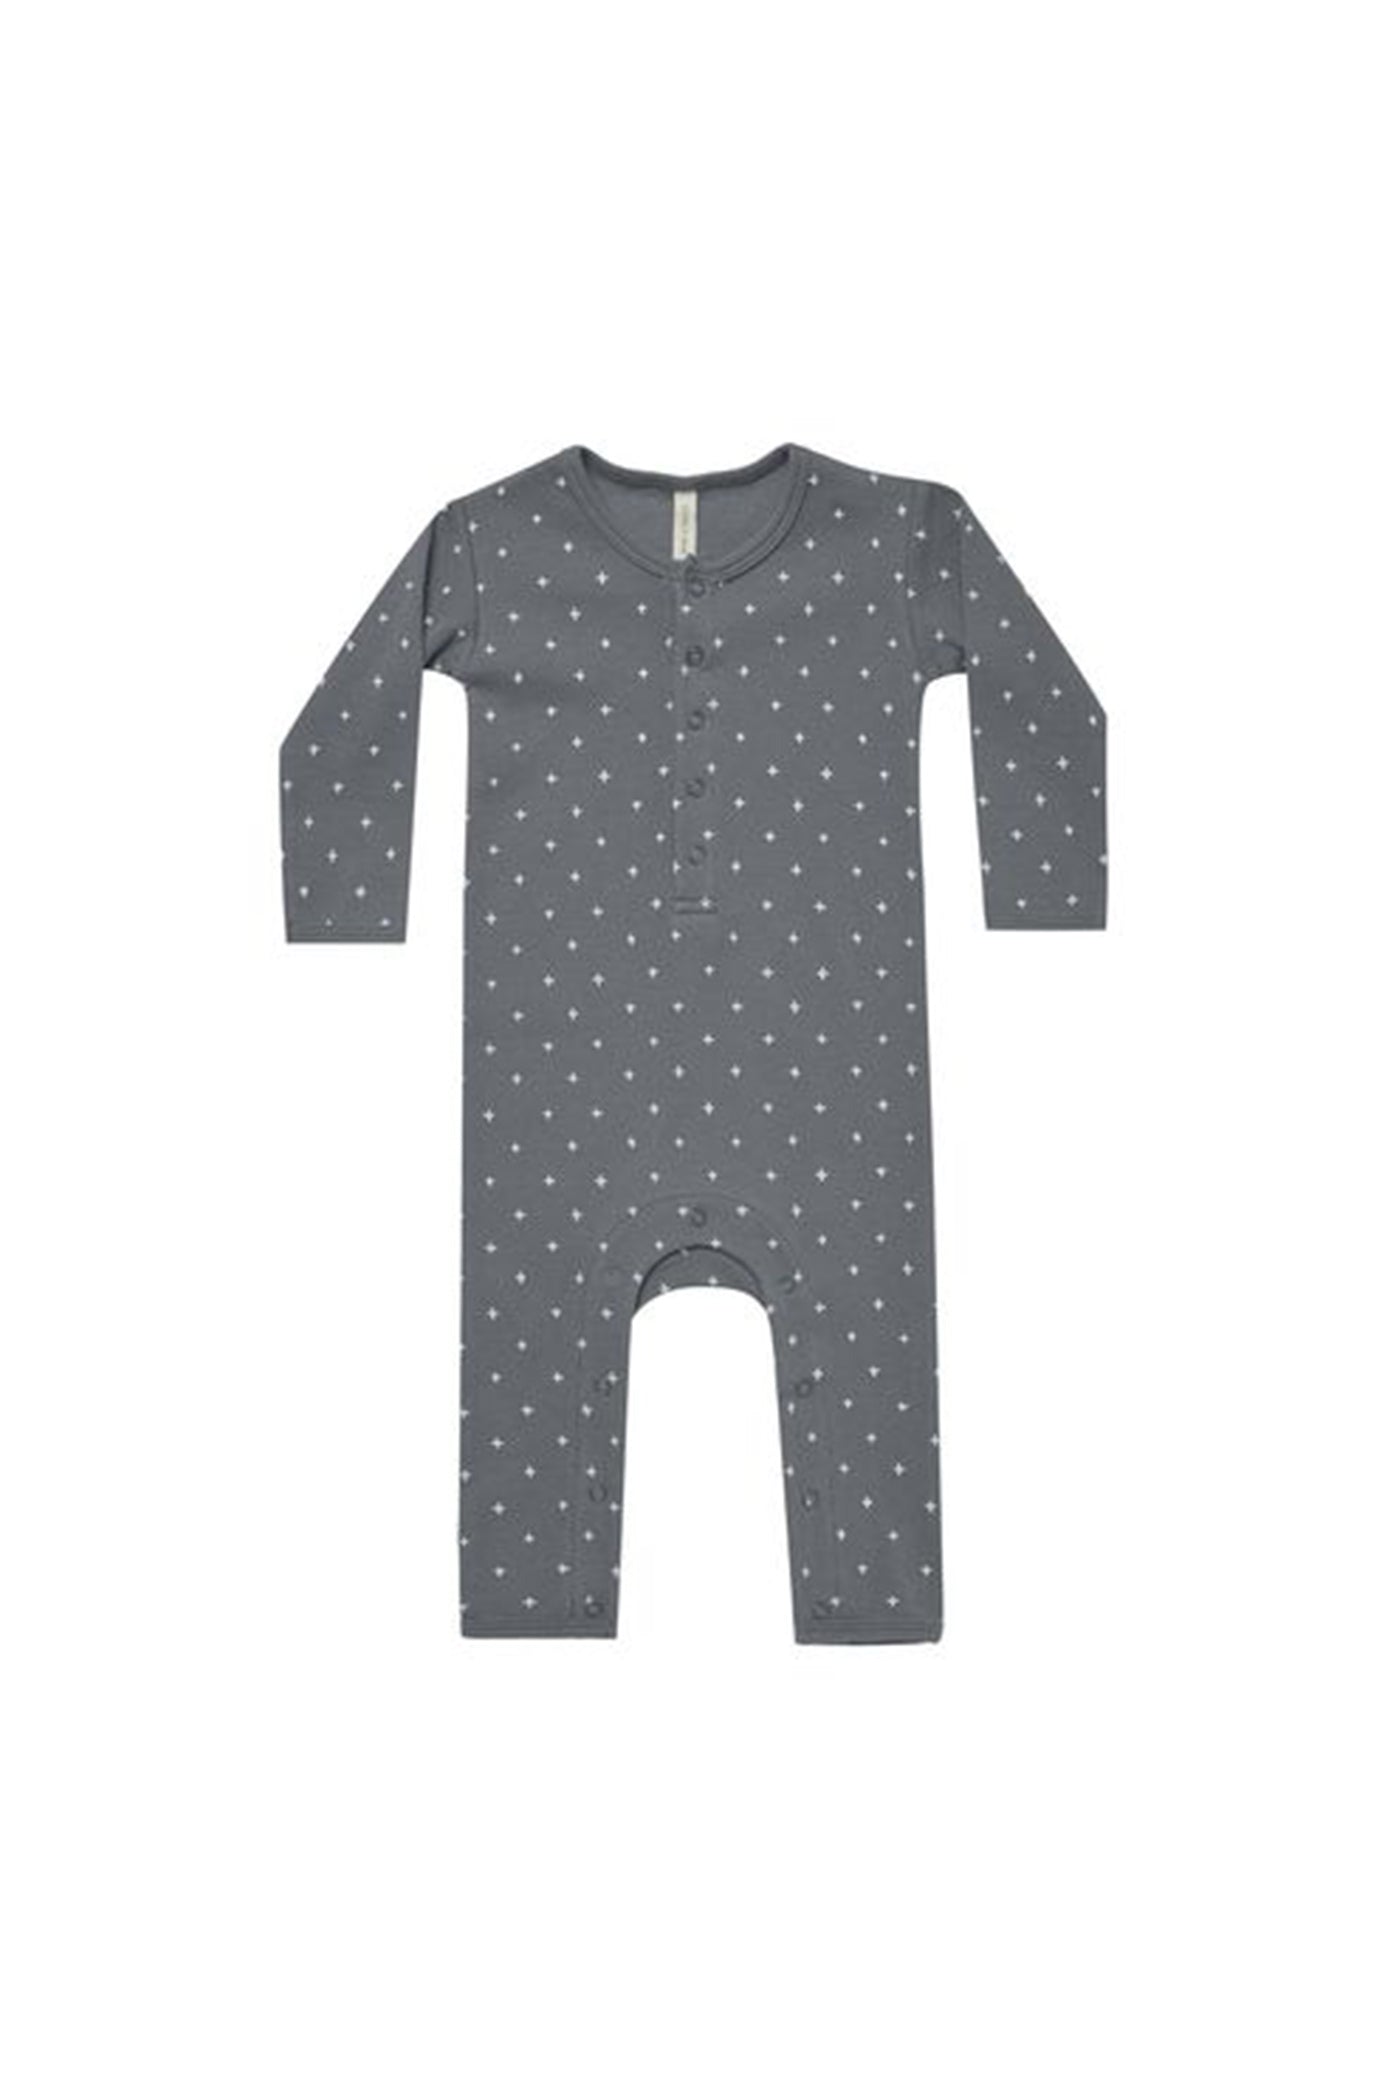 Ribbed Baby Jumpsuit by Quncy Mae